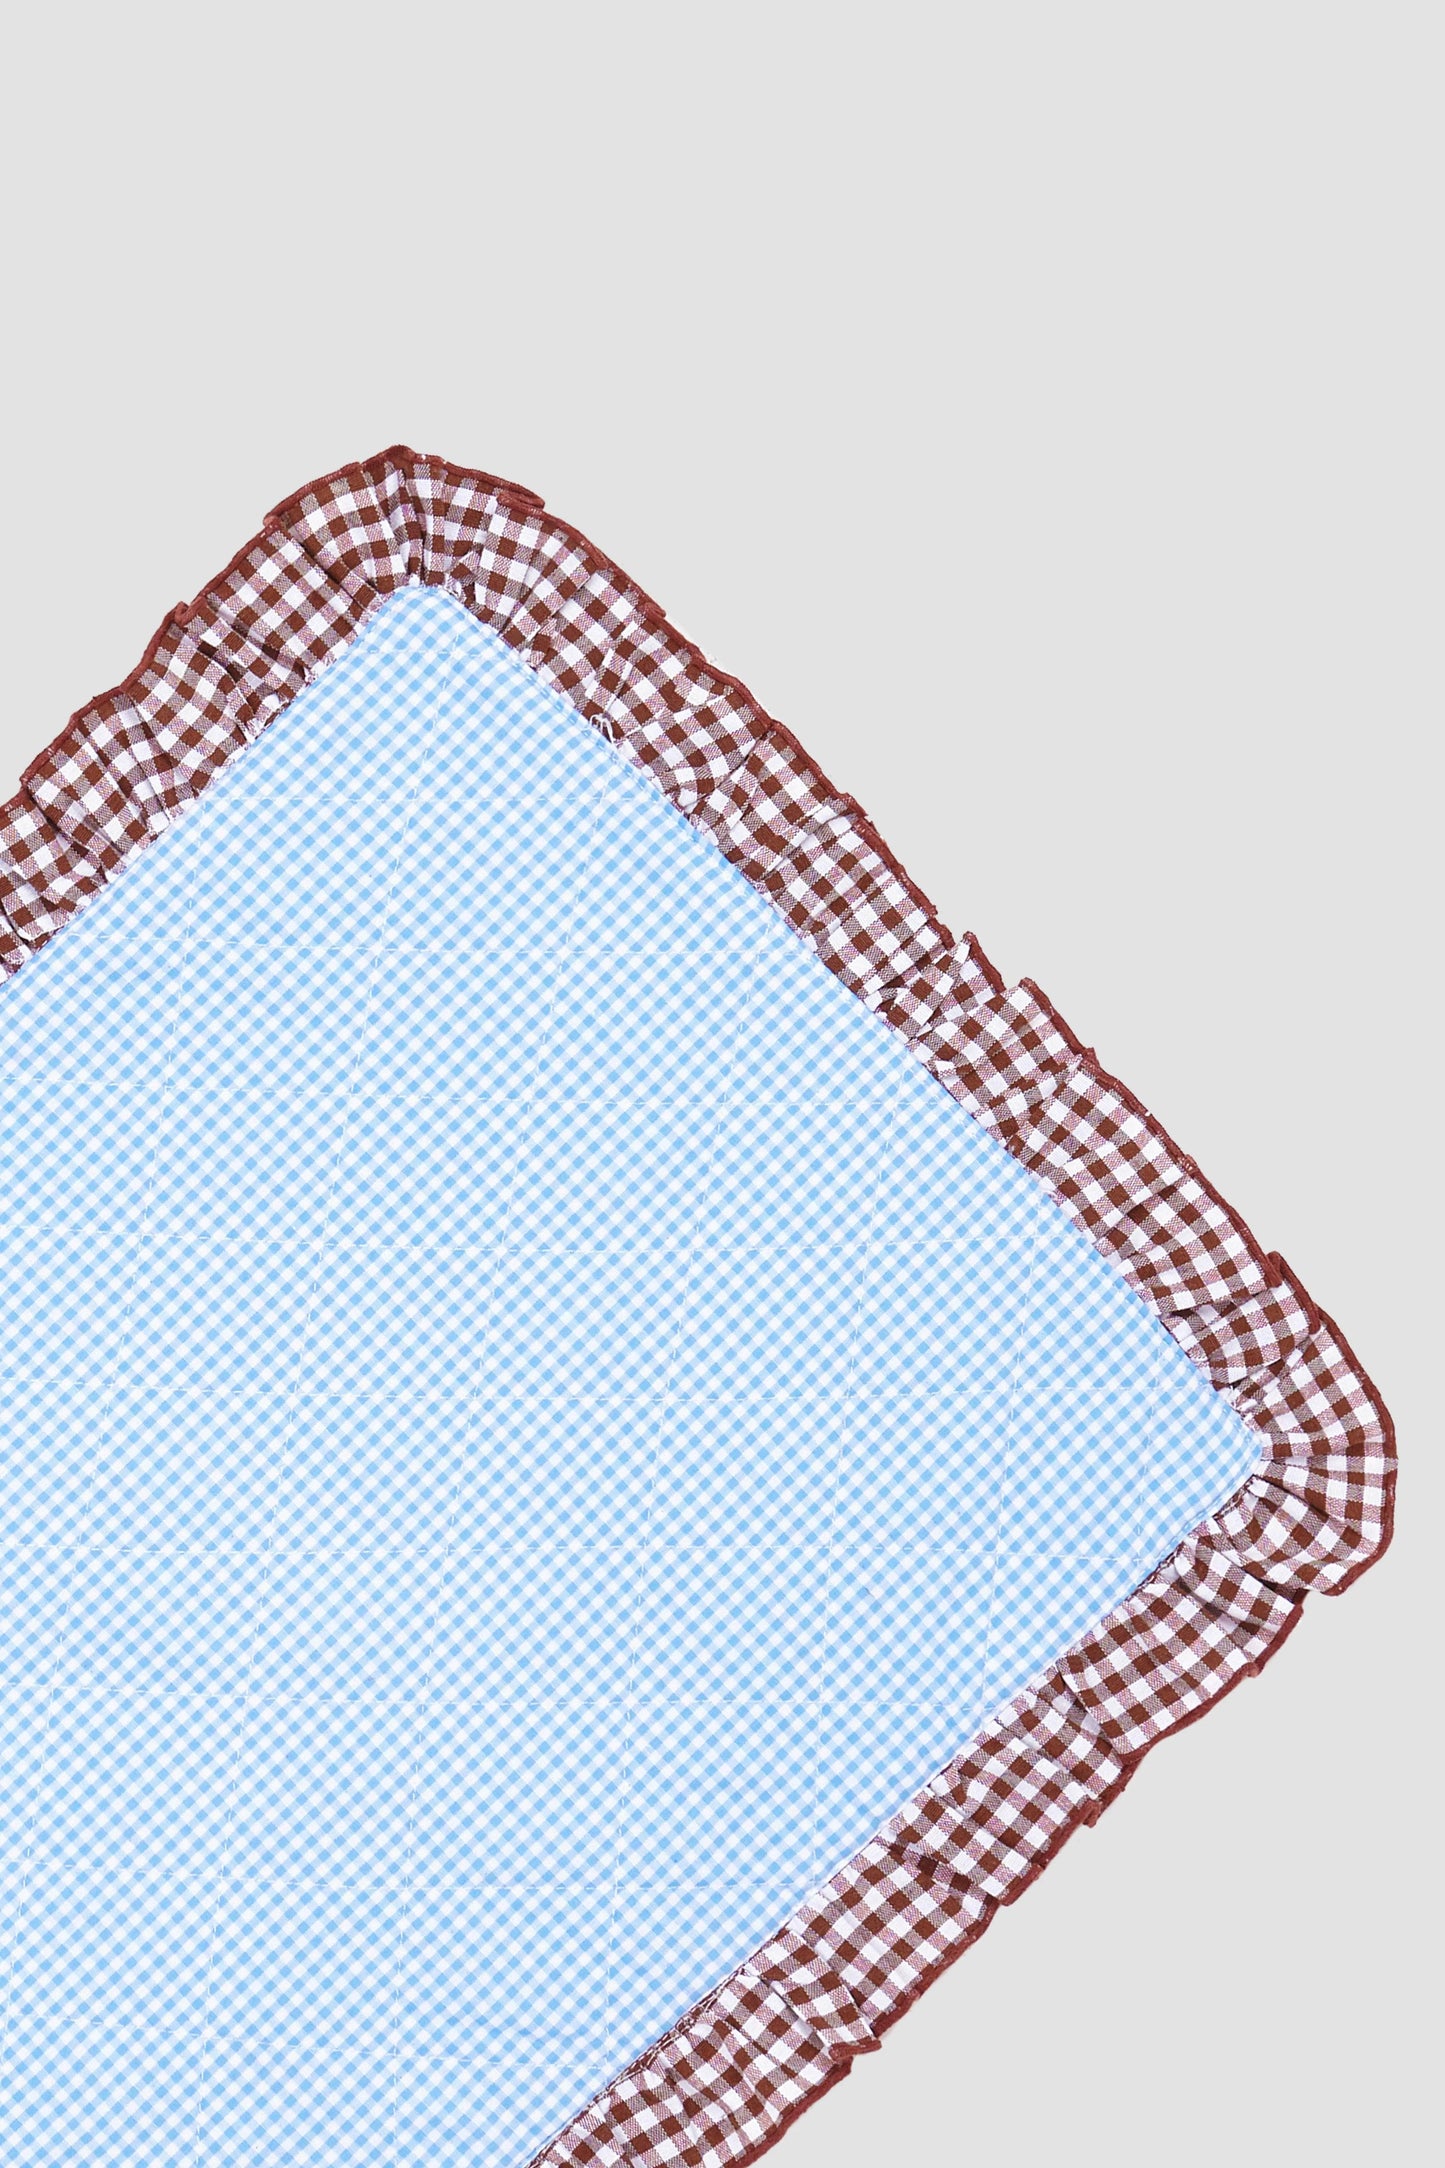 Picnic Gingham Placemat Blue